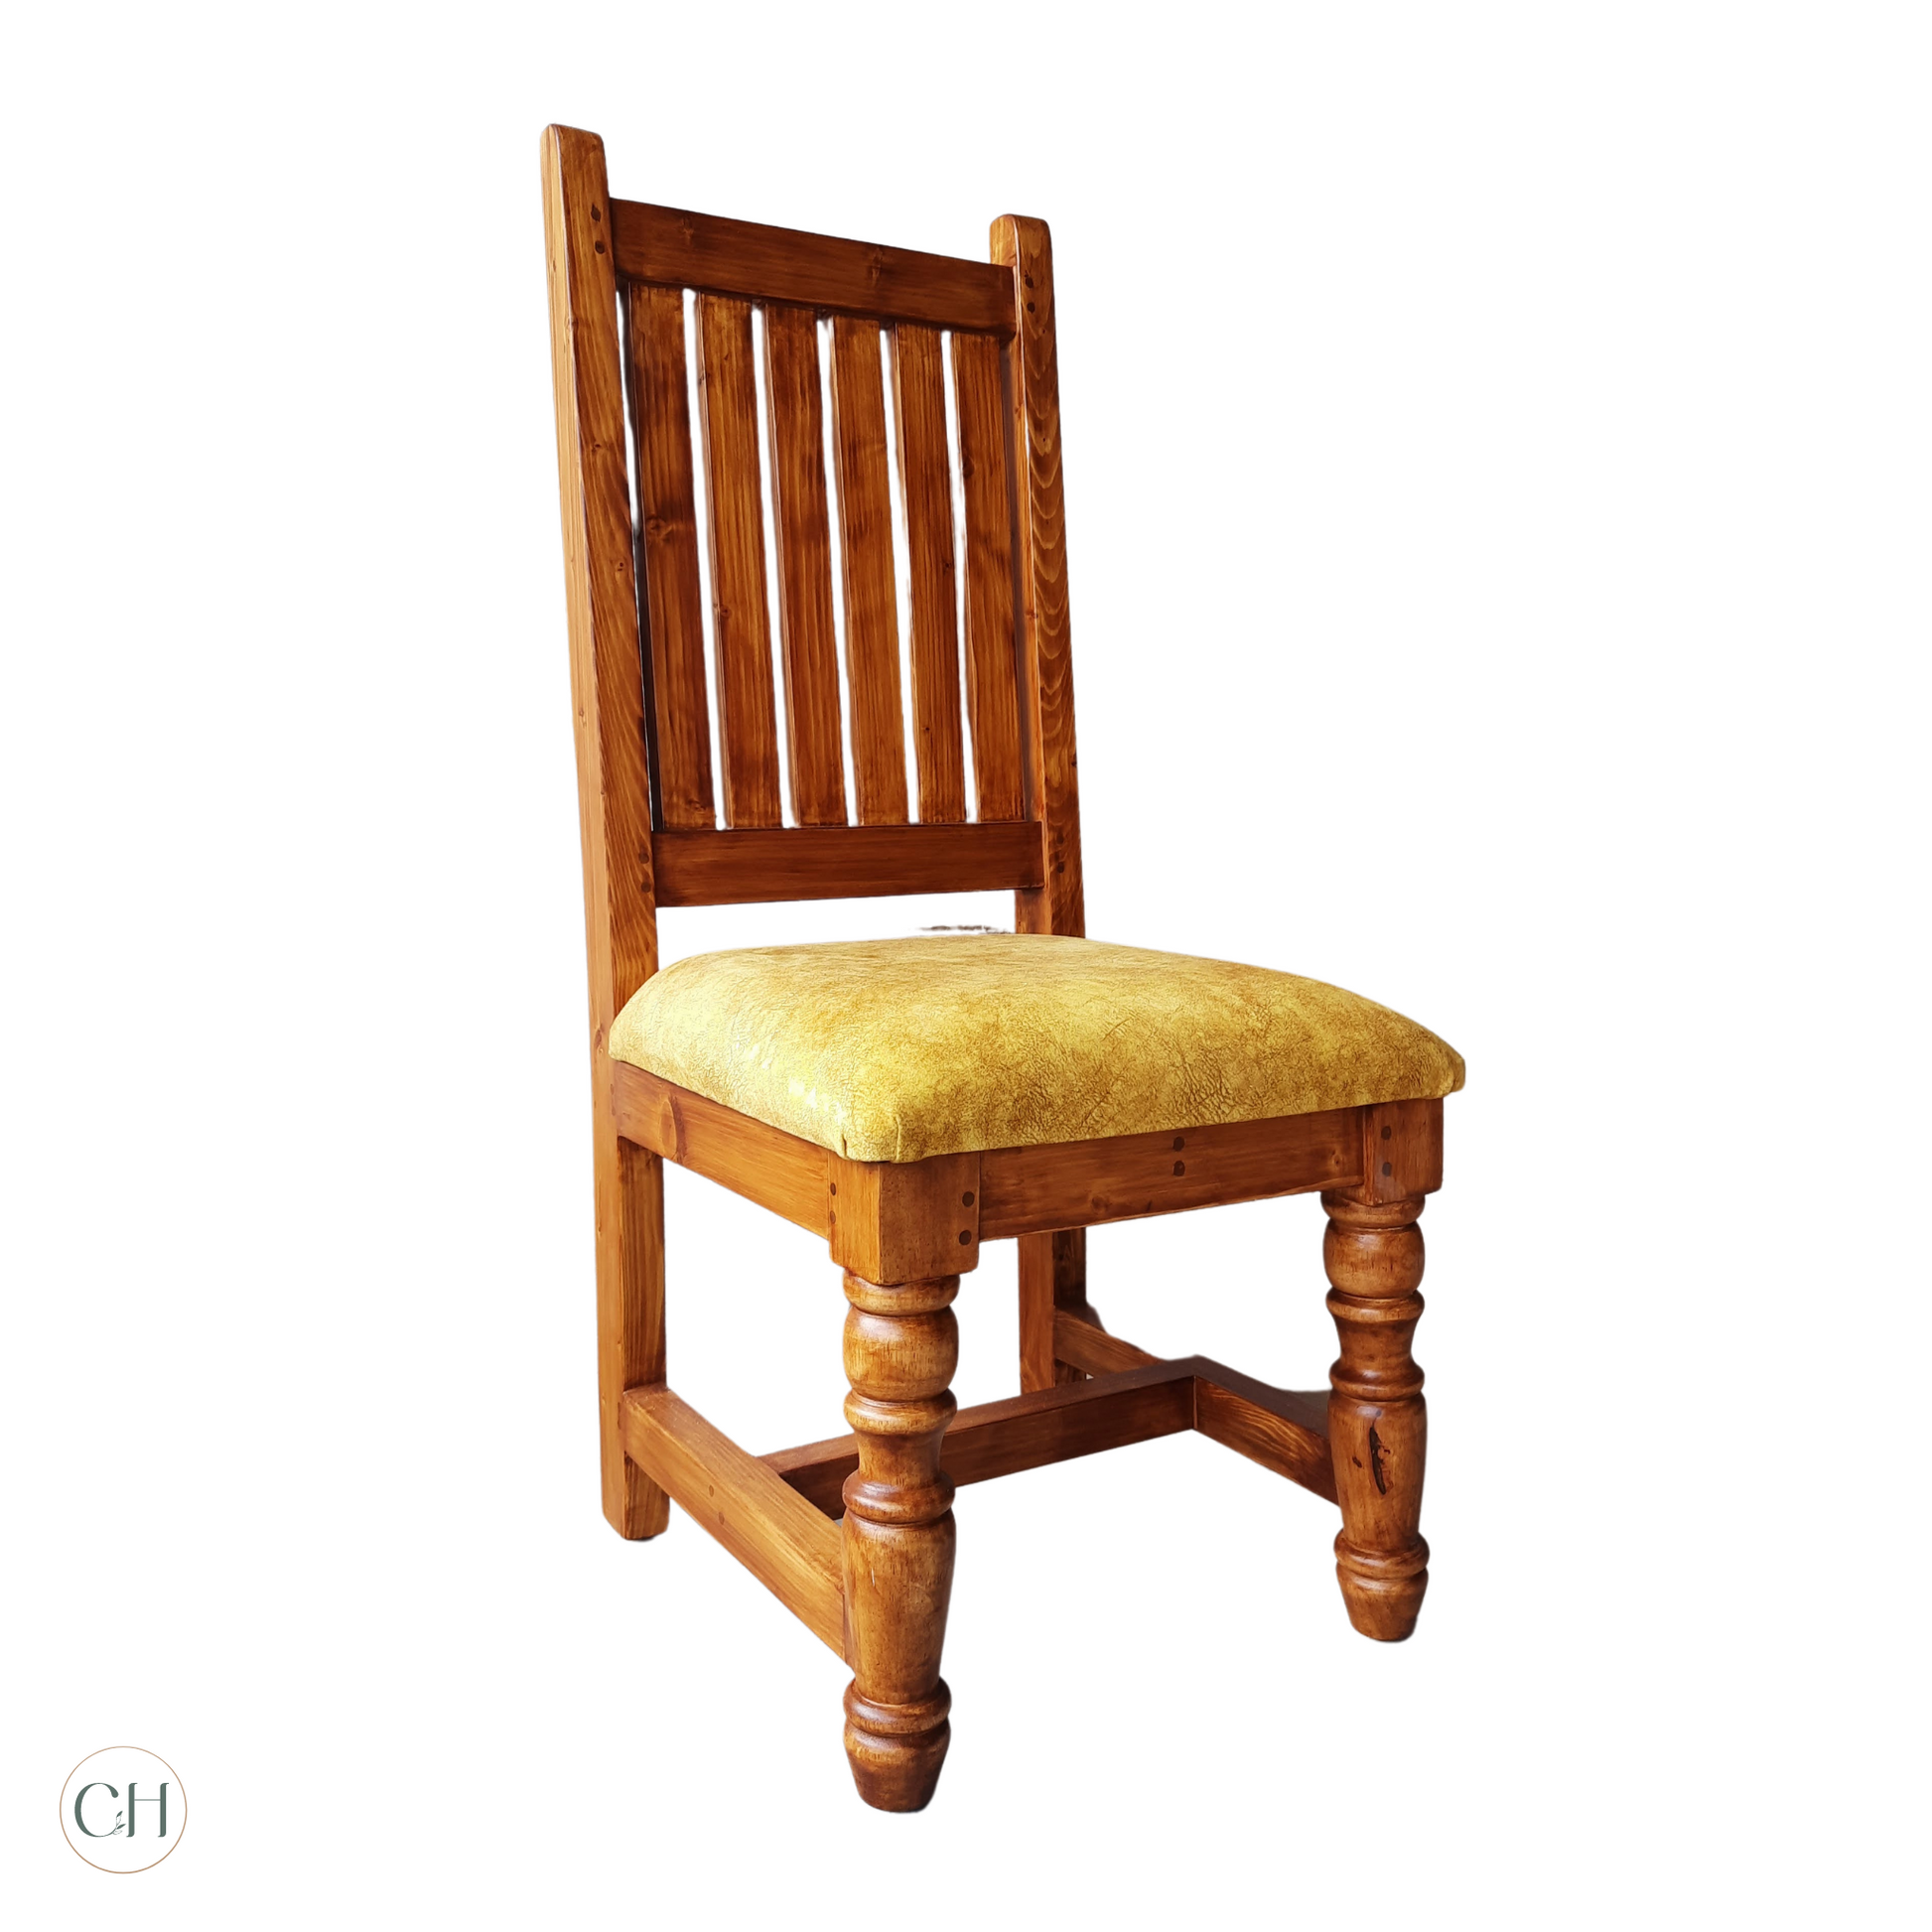 CustHum-Marigold-single chair bright yellow upholstery on seat, handturned legs (ISO)